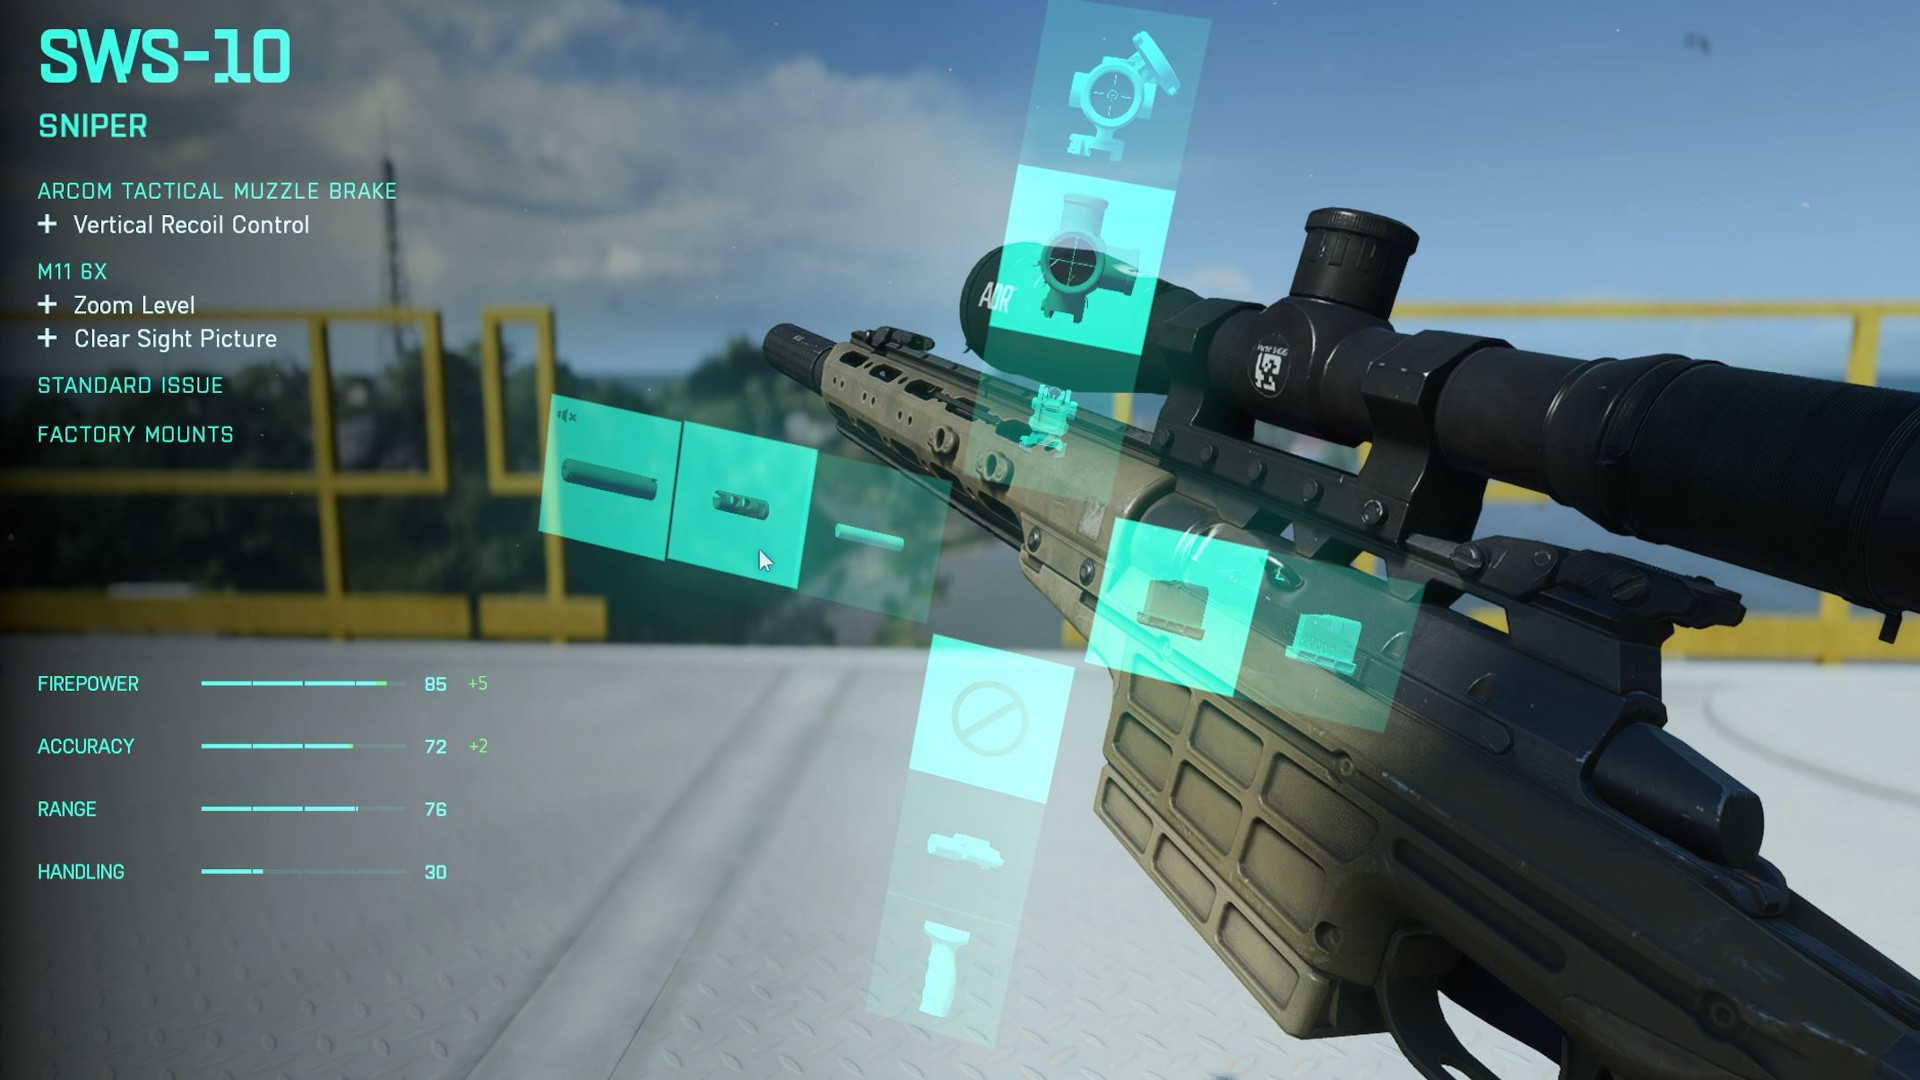 Best SWS-10 Battlefield 2042 loadout: the plus menu showing off different attachments for the SWS-10 